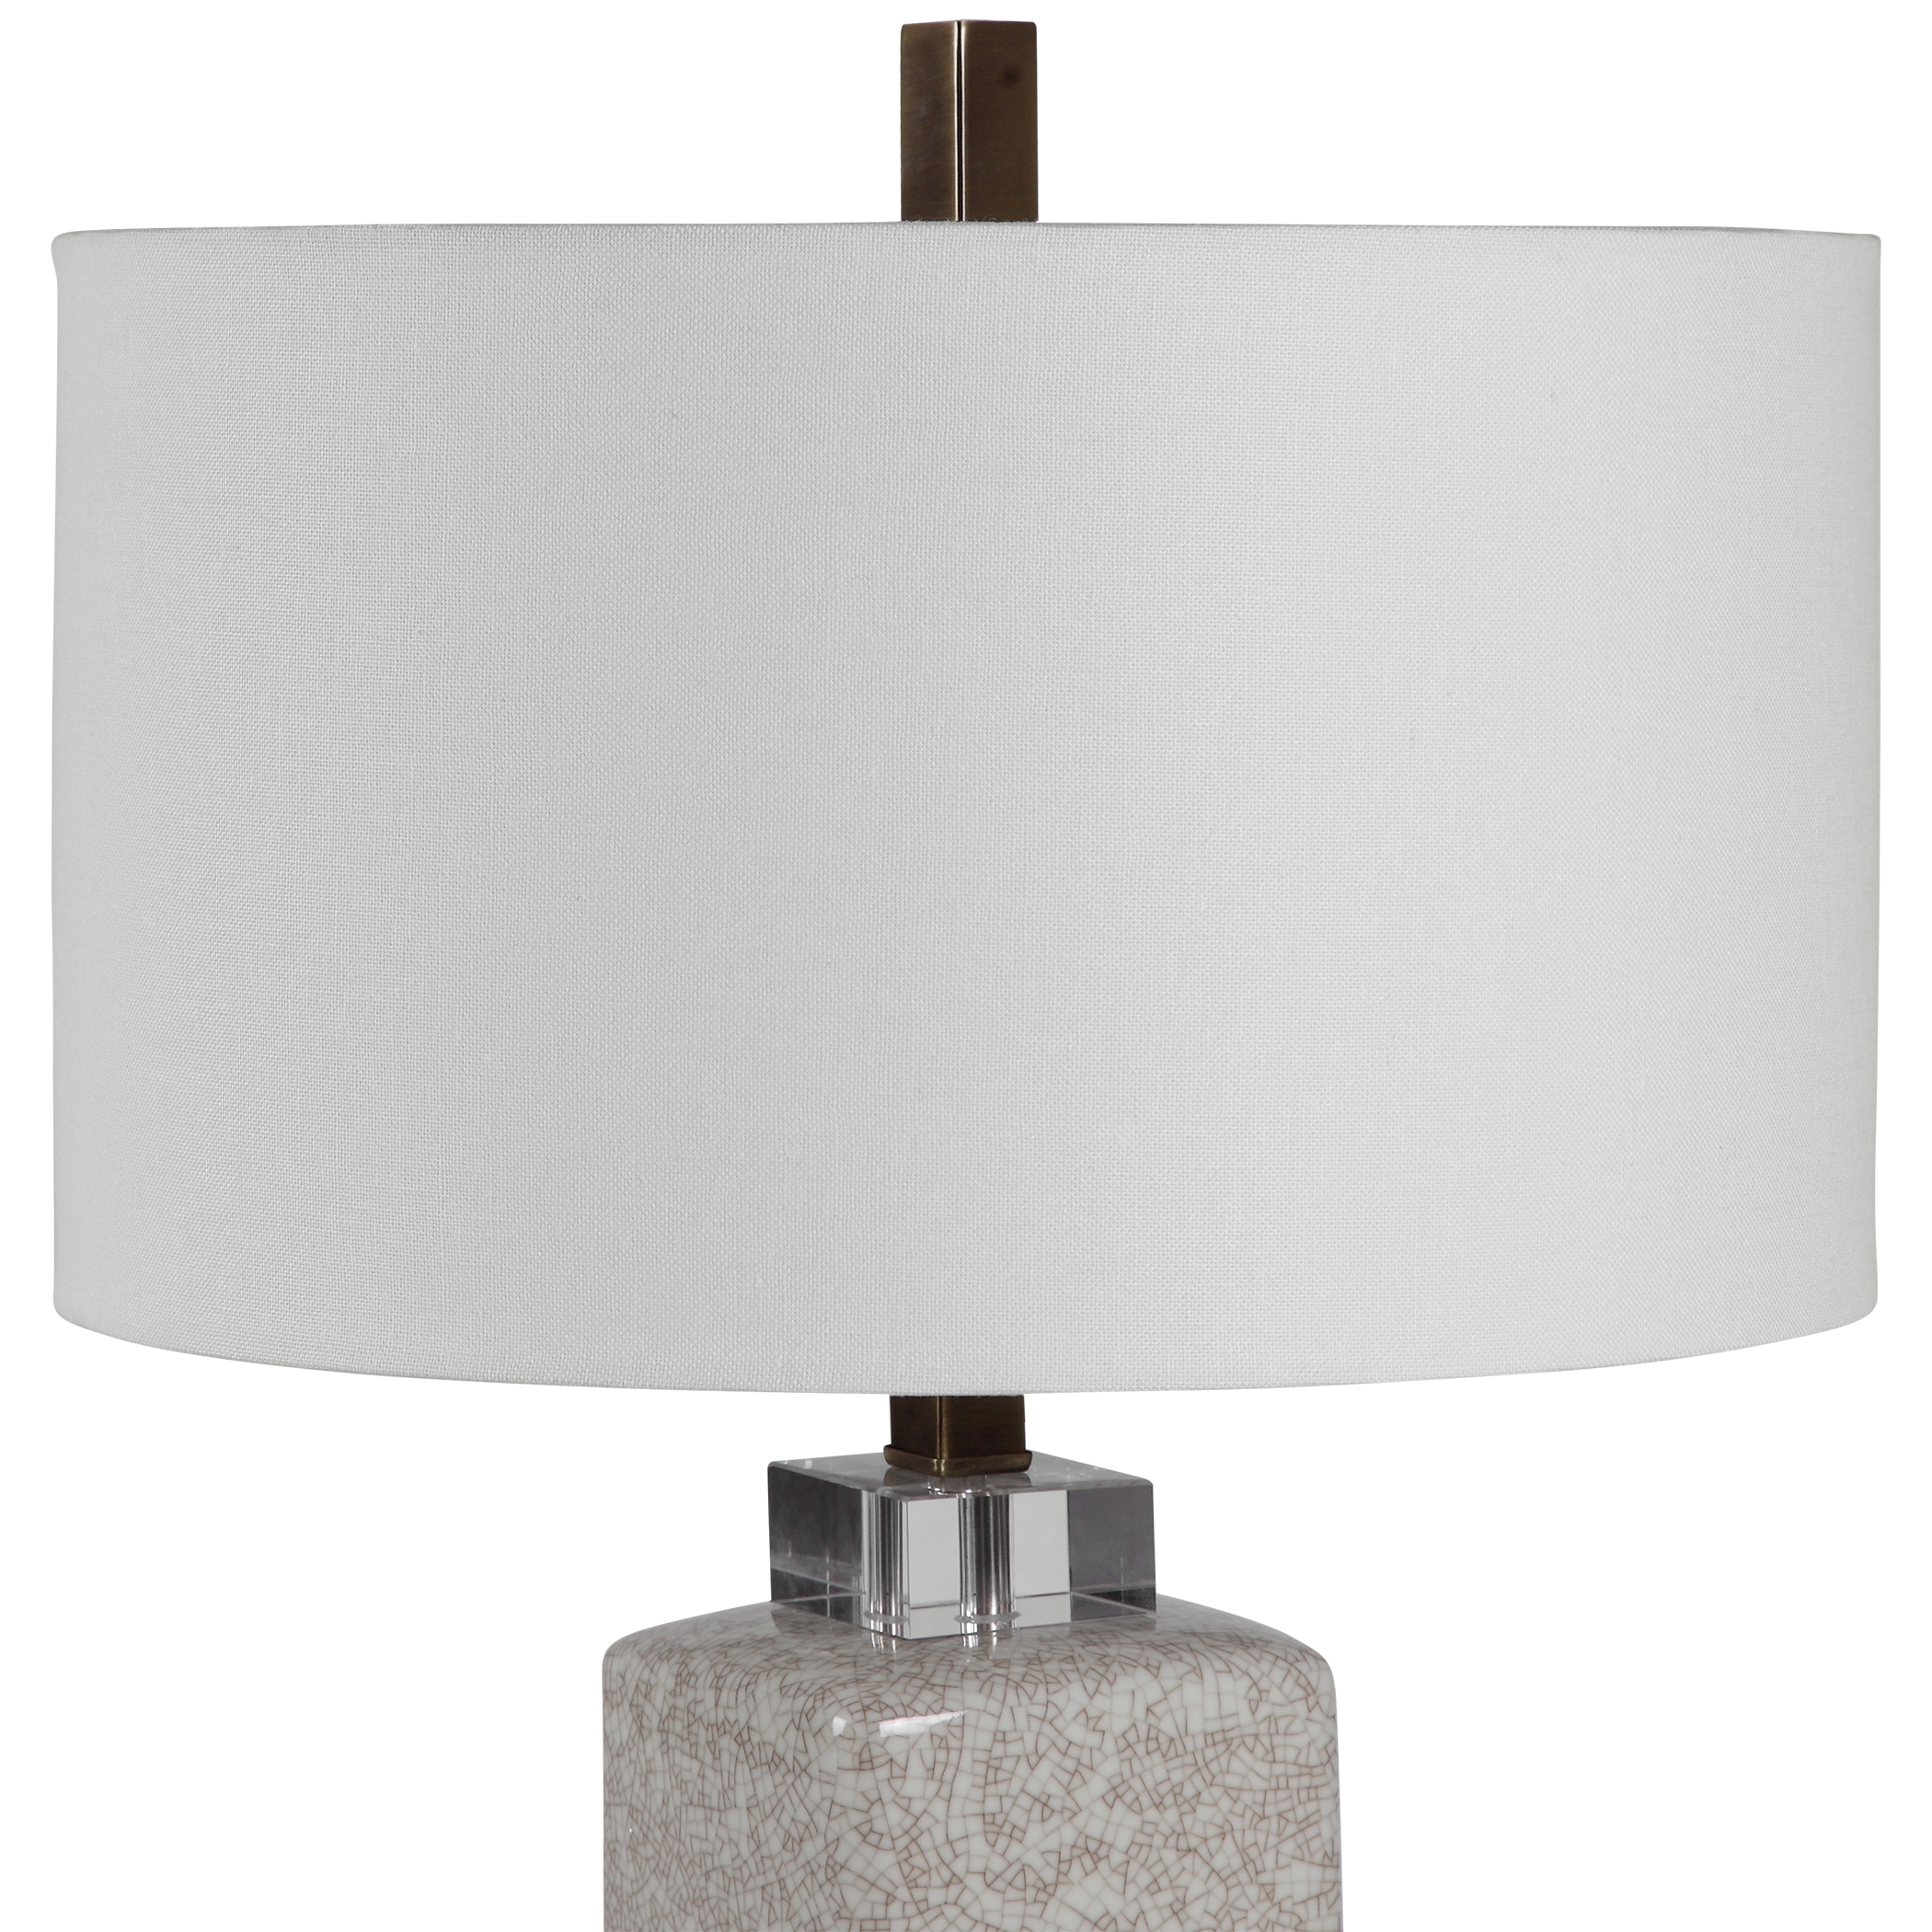 Irie Crackled Taupe Table Lamp - Image 4